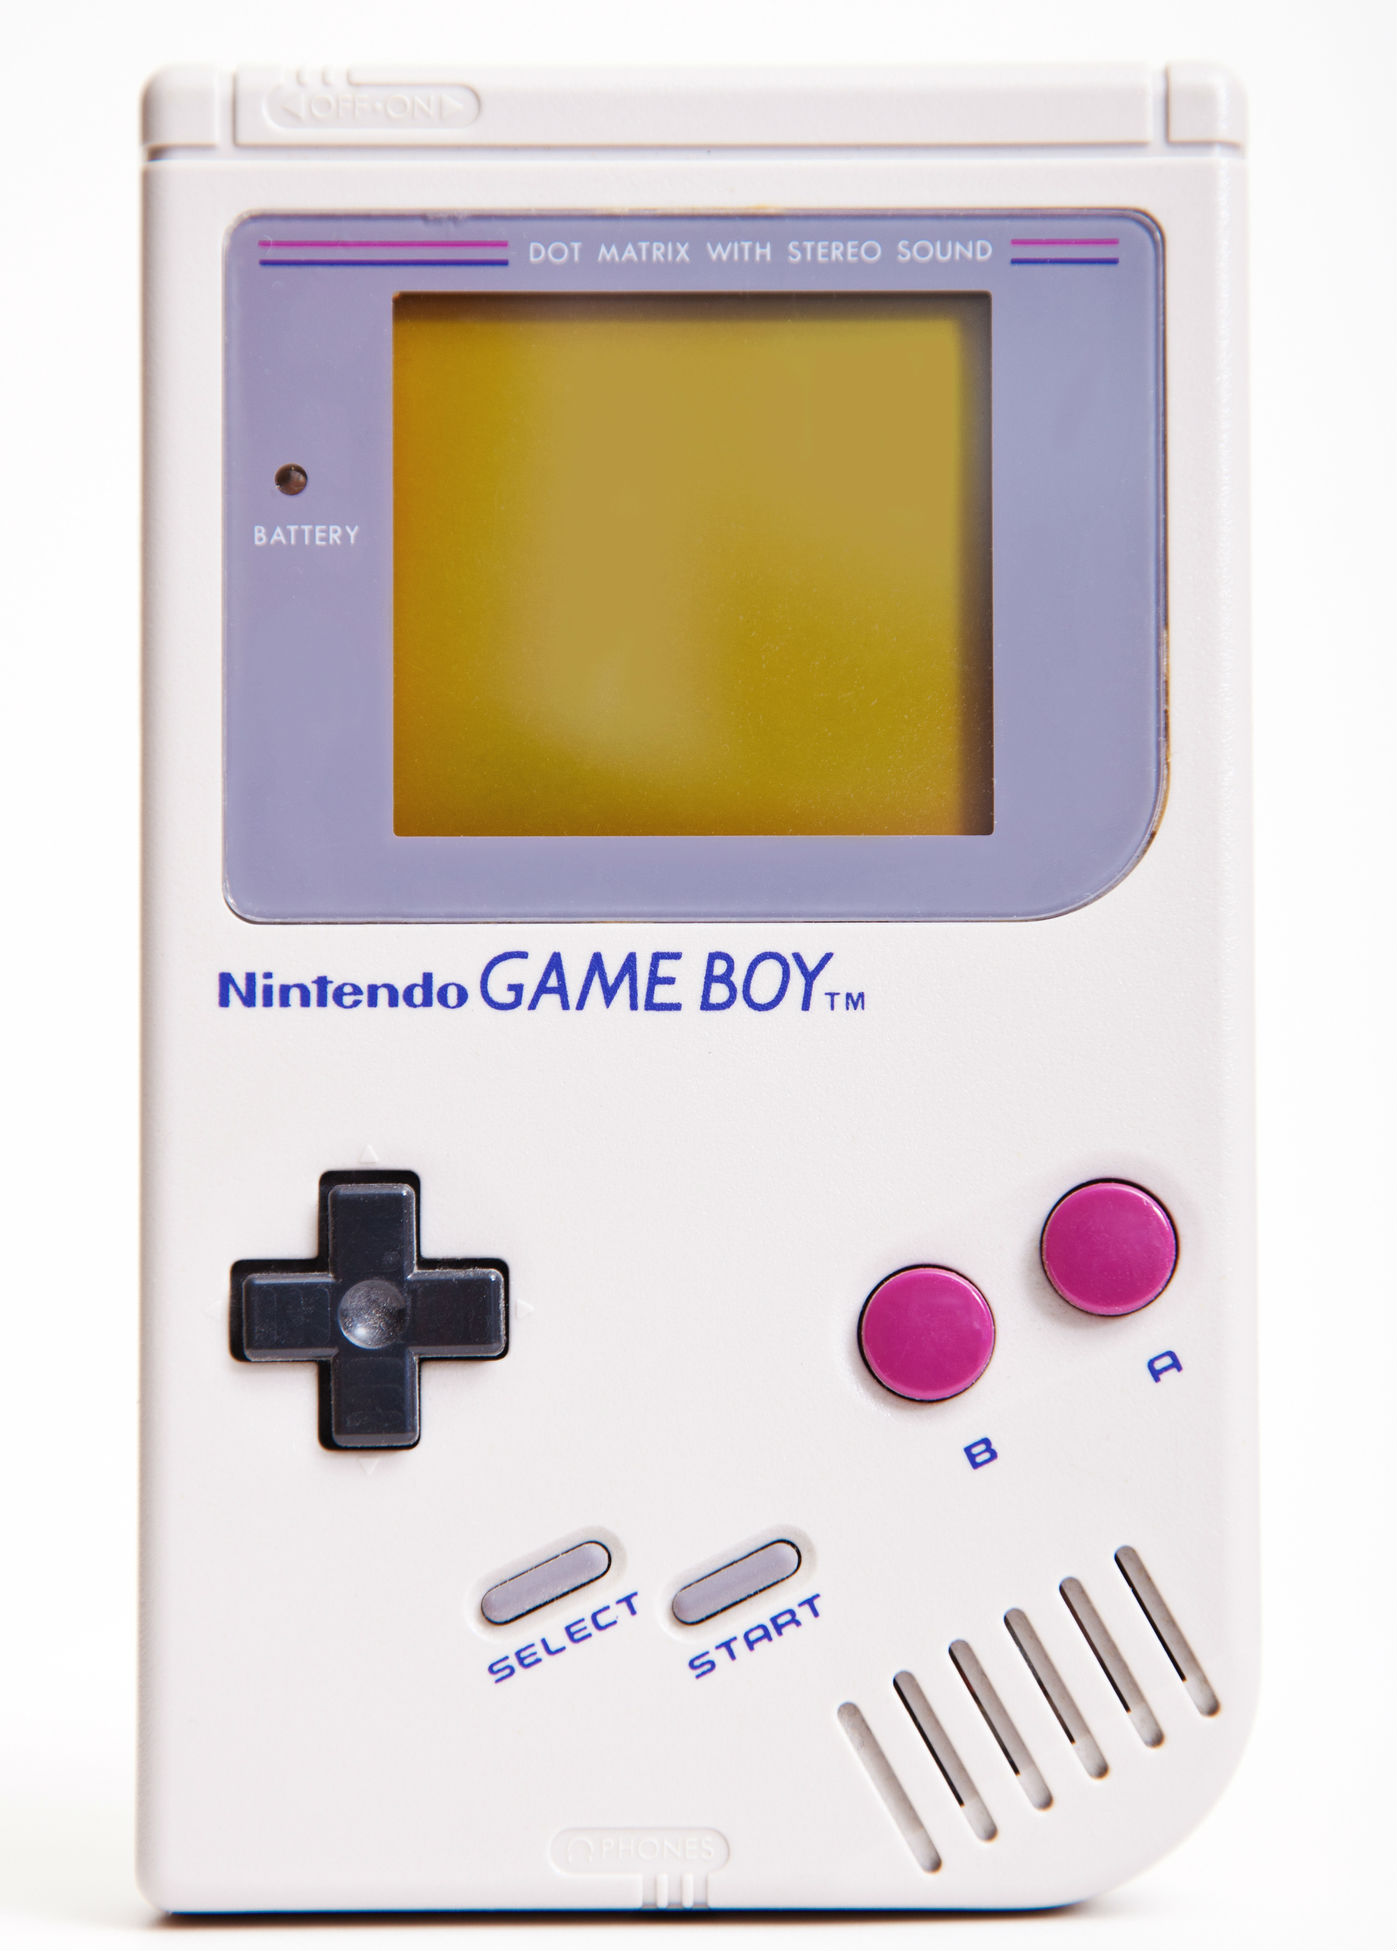 Early iteration of the iconic Nintendo Gameboy